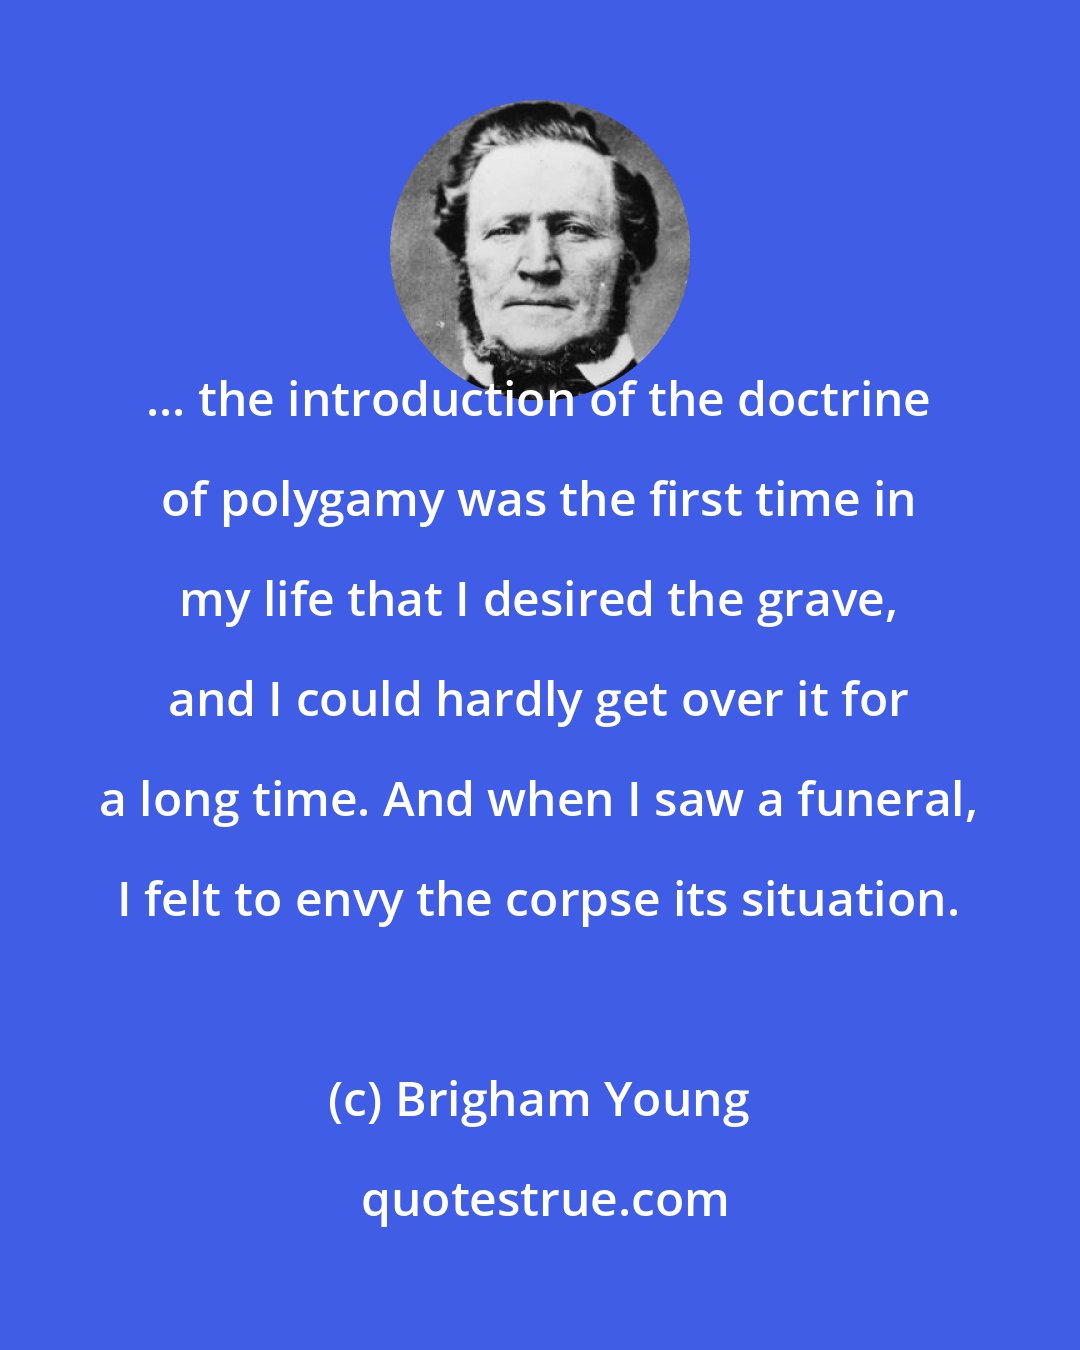 Brigham Young: ... the introduction of the doctrine of polygamy was the first time in my life that I desired the grave, and I could hardly get over it for a long time. And when I saw a funeral, I felt to envy the corpse its situation.